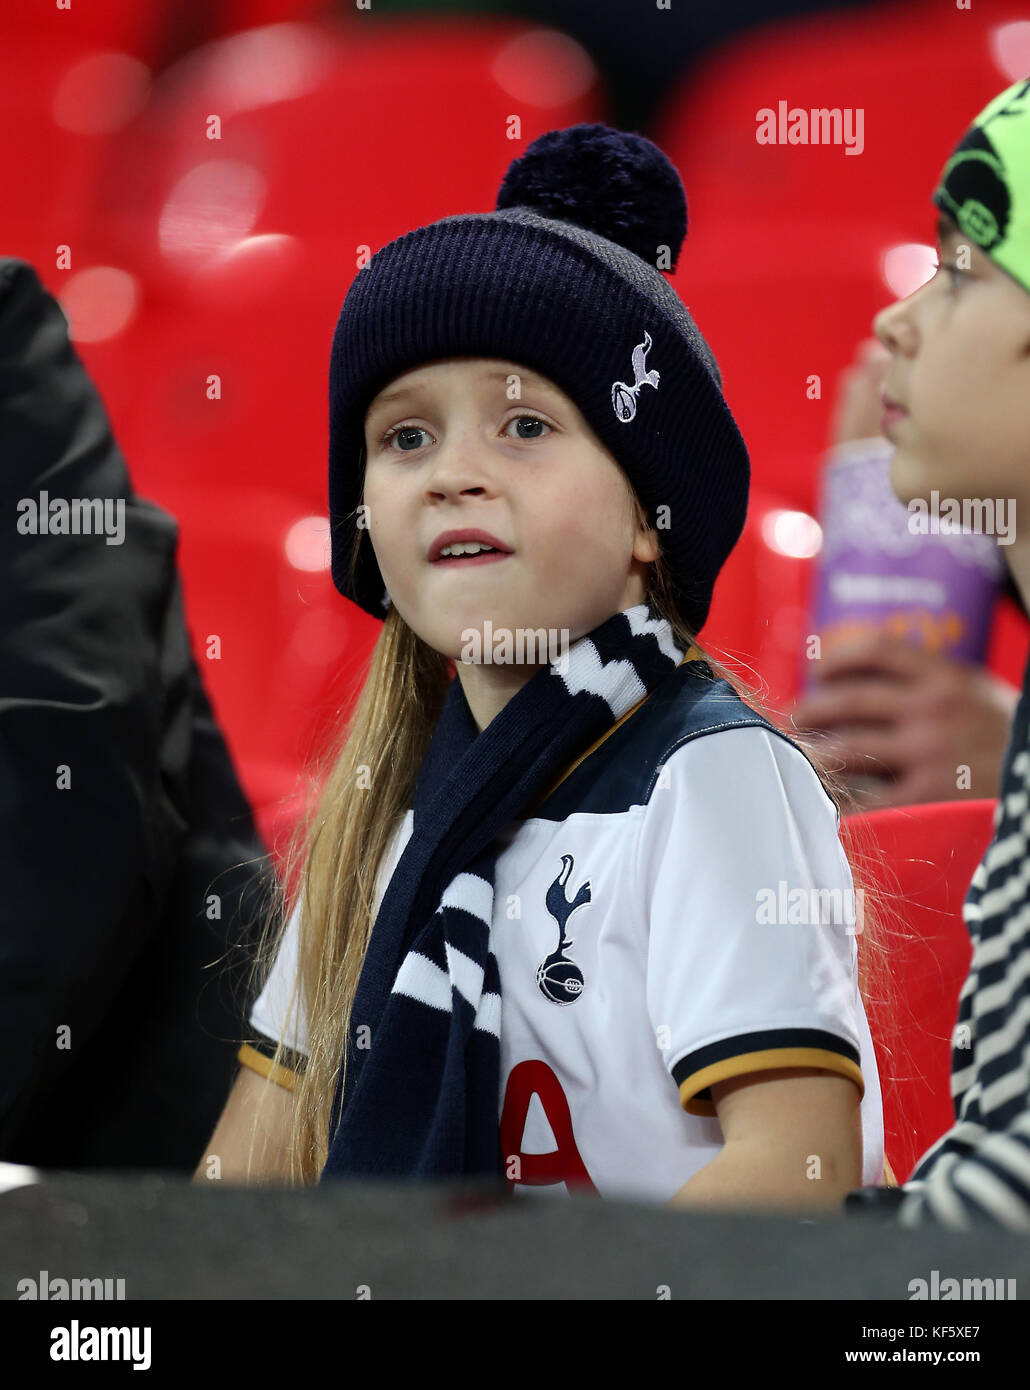 A young Tottenham Hotspur' fan in the stands during the Carabao Cup, Fourth Round match at Wembley, London. PRESS ASSOCIATION Photo. Picture date: Wednesday October 25, 2017. See PA story SOCCER Tottenham. Photo credit should read: Steven Paston/PA Wire. RESTRICTIONS: No use with unauthorised audio, video, data, fixture lists, club/league logos or 'live' services. Online in-match use limited to 75 images, no video emulation. No use in betting, games or single club/league/player publications. Stock Photo